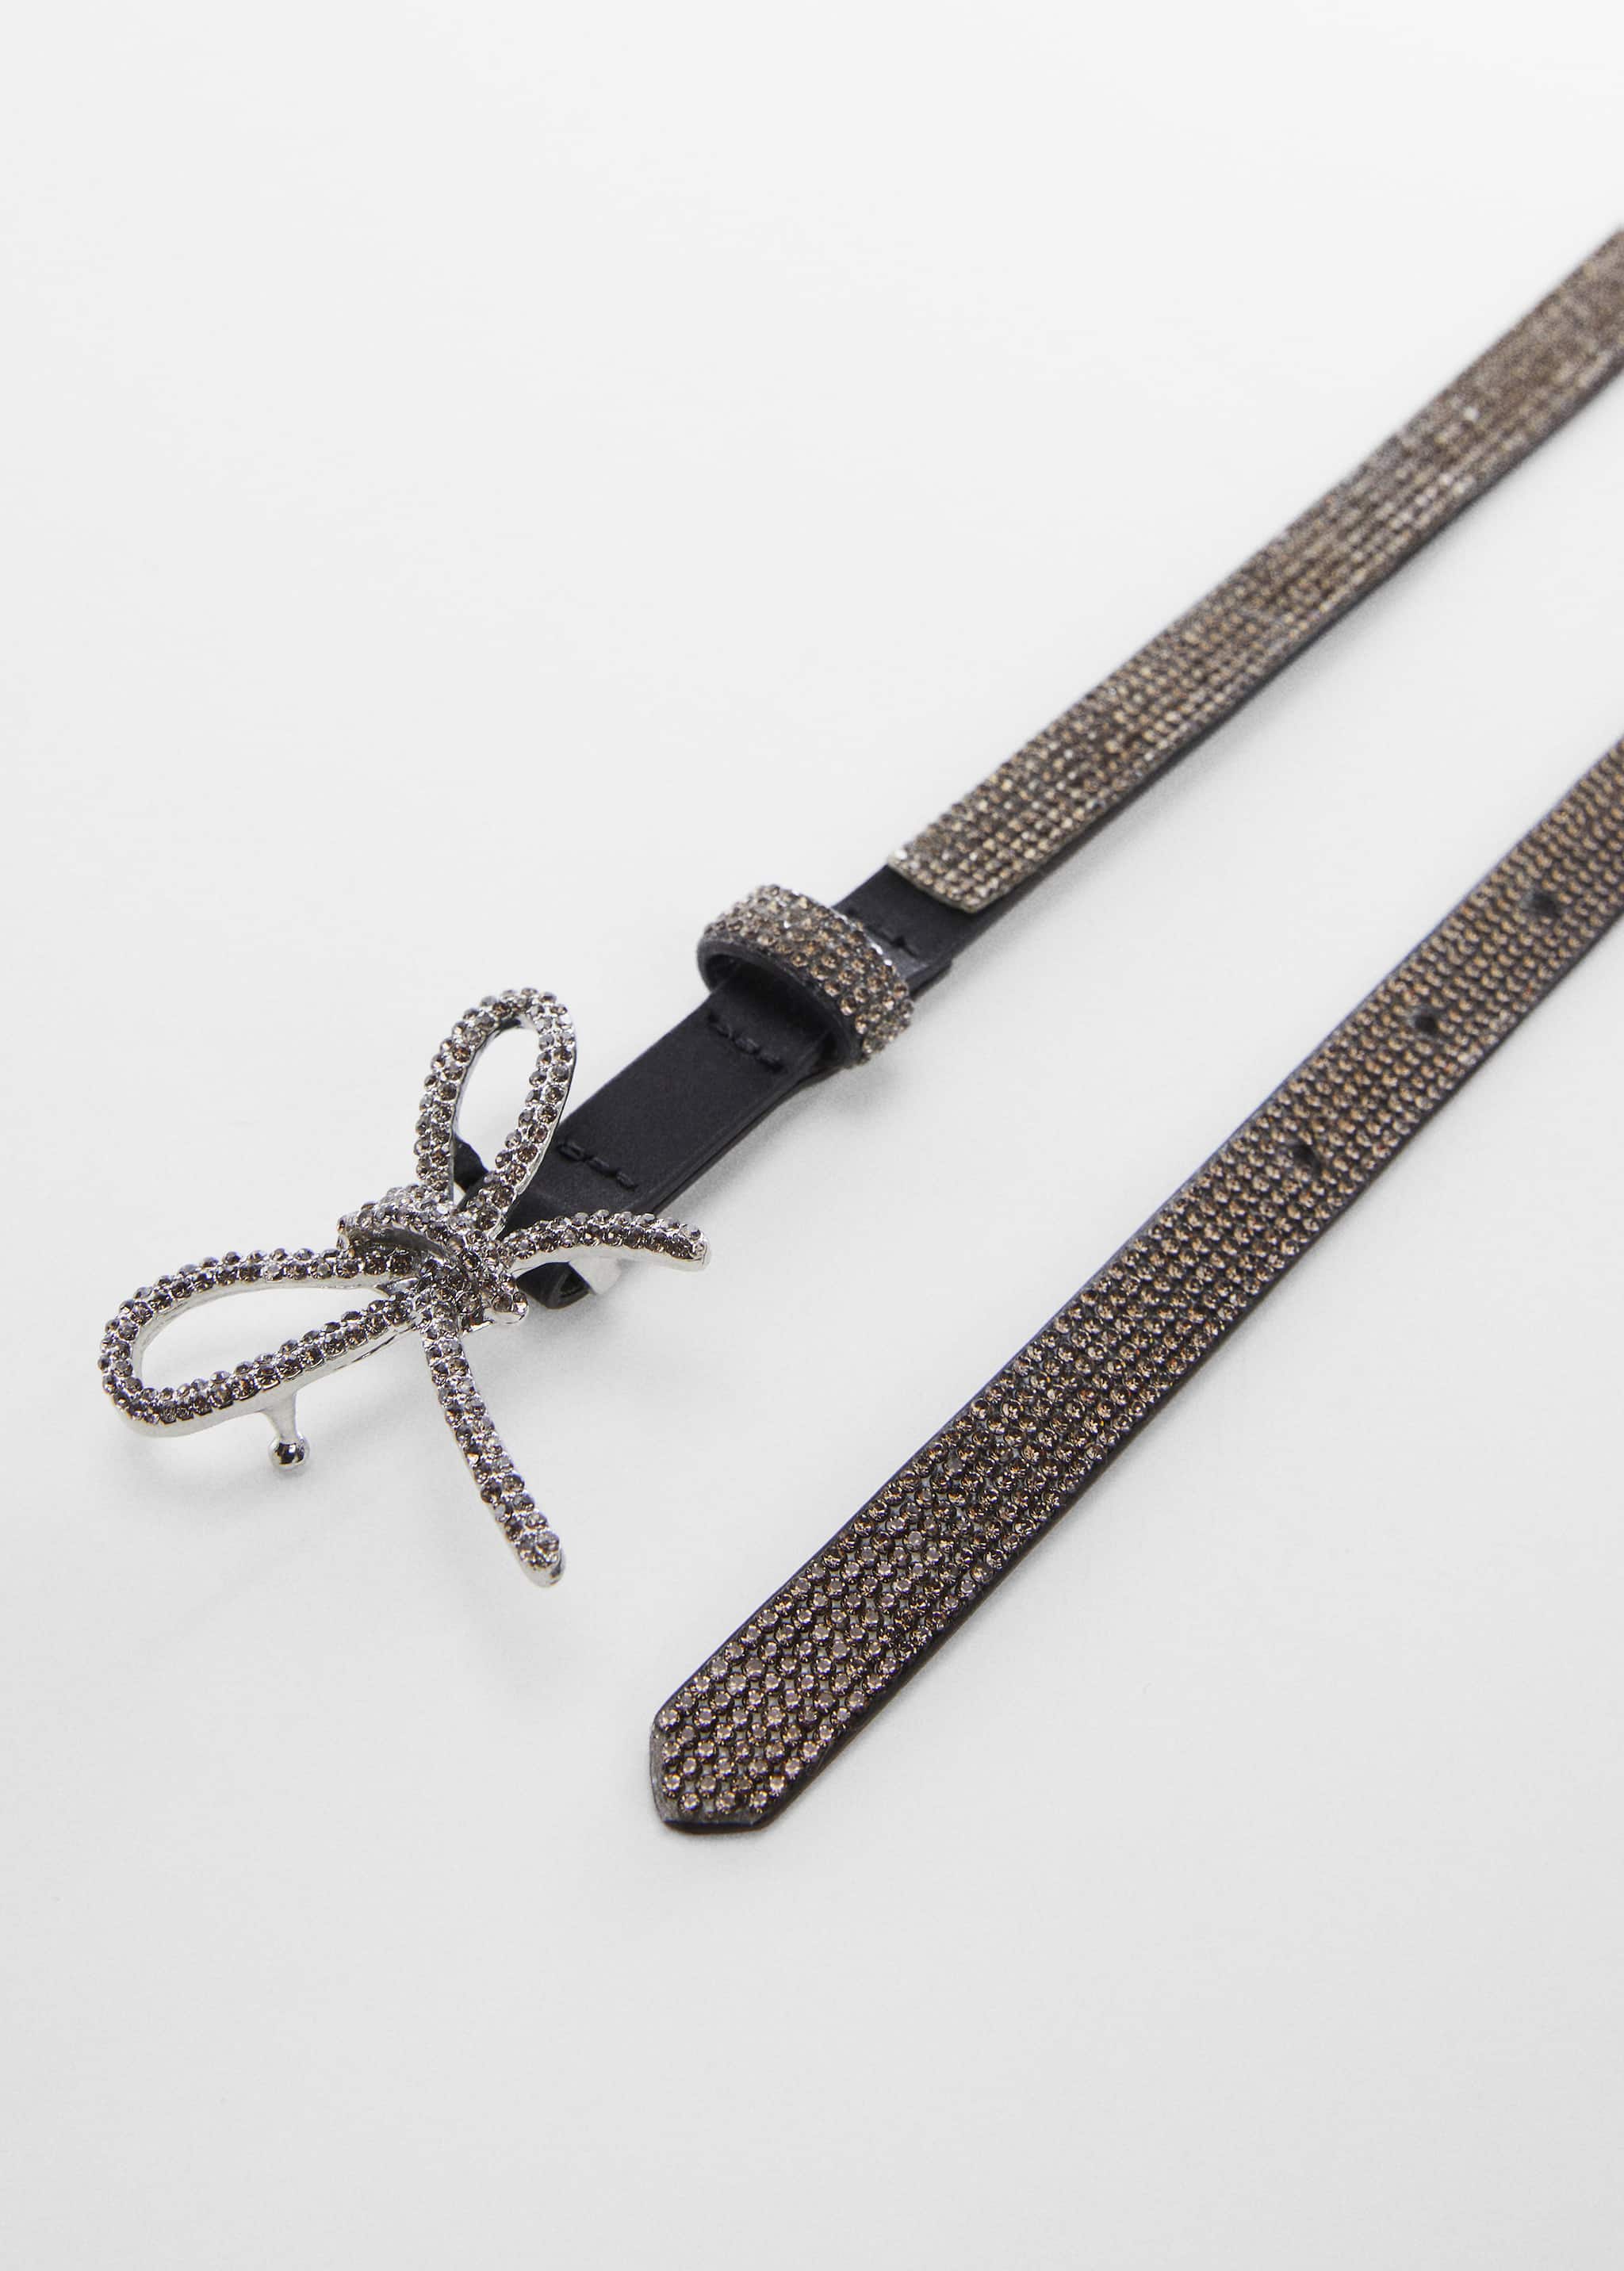 Rhinestone belt with bow - Details of the article 2